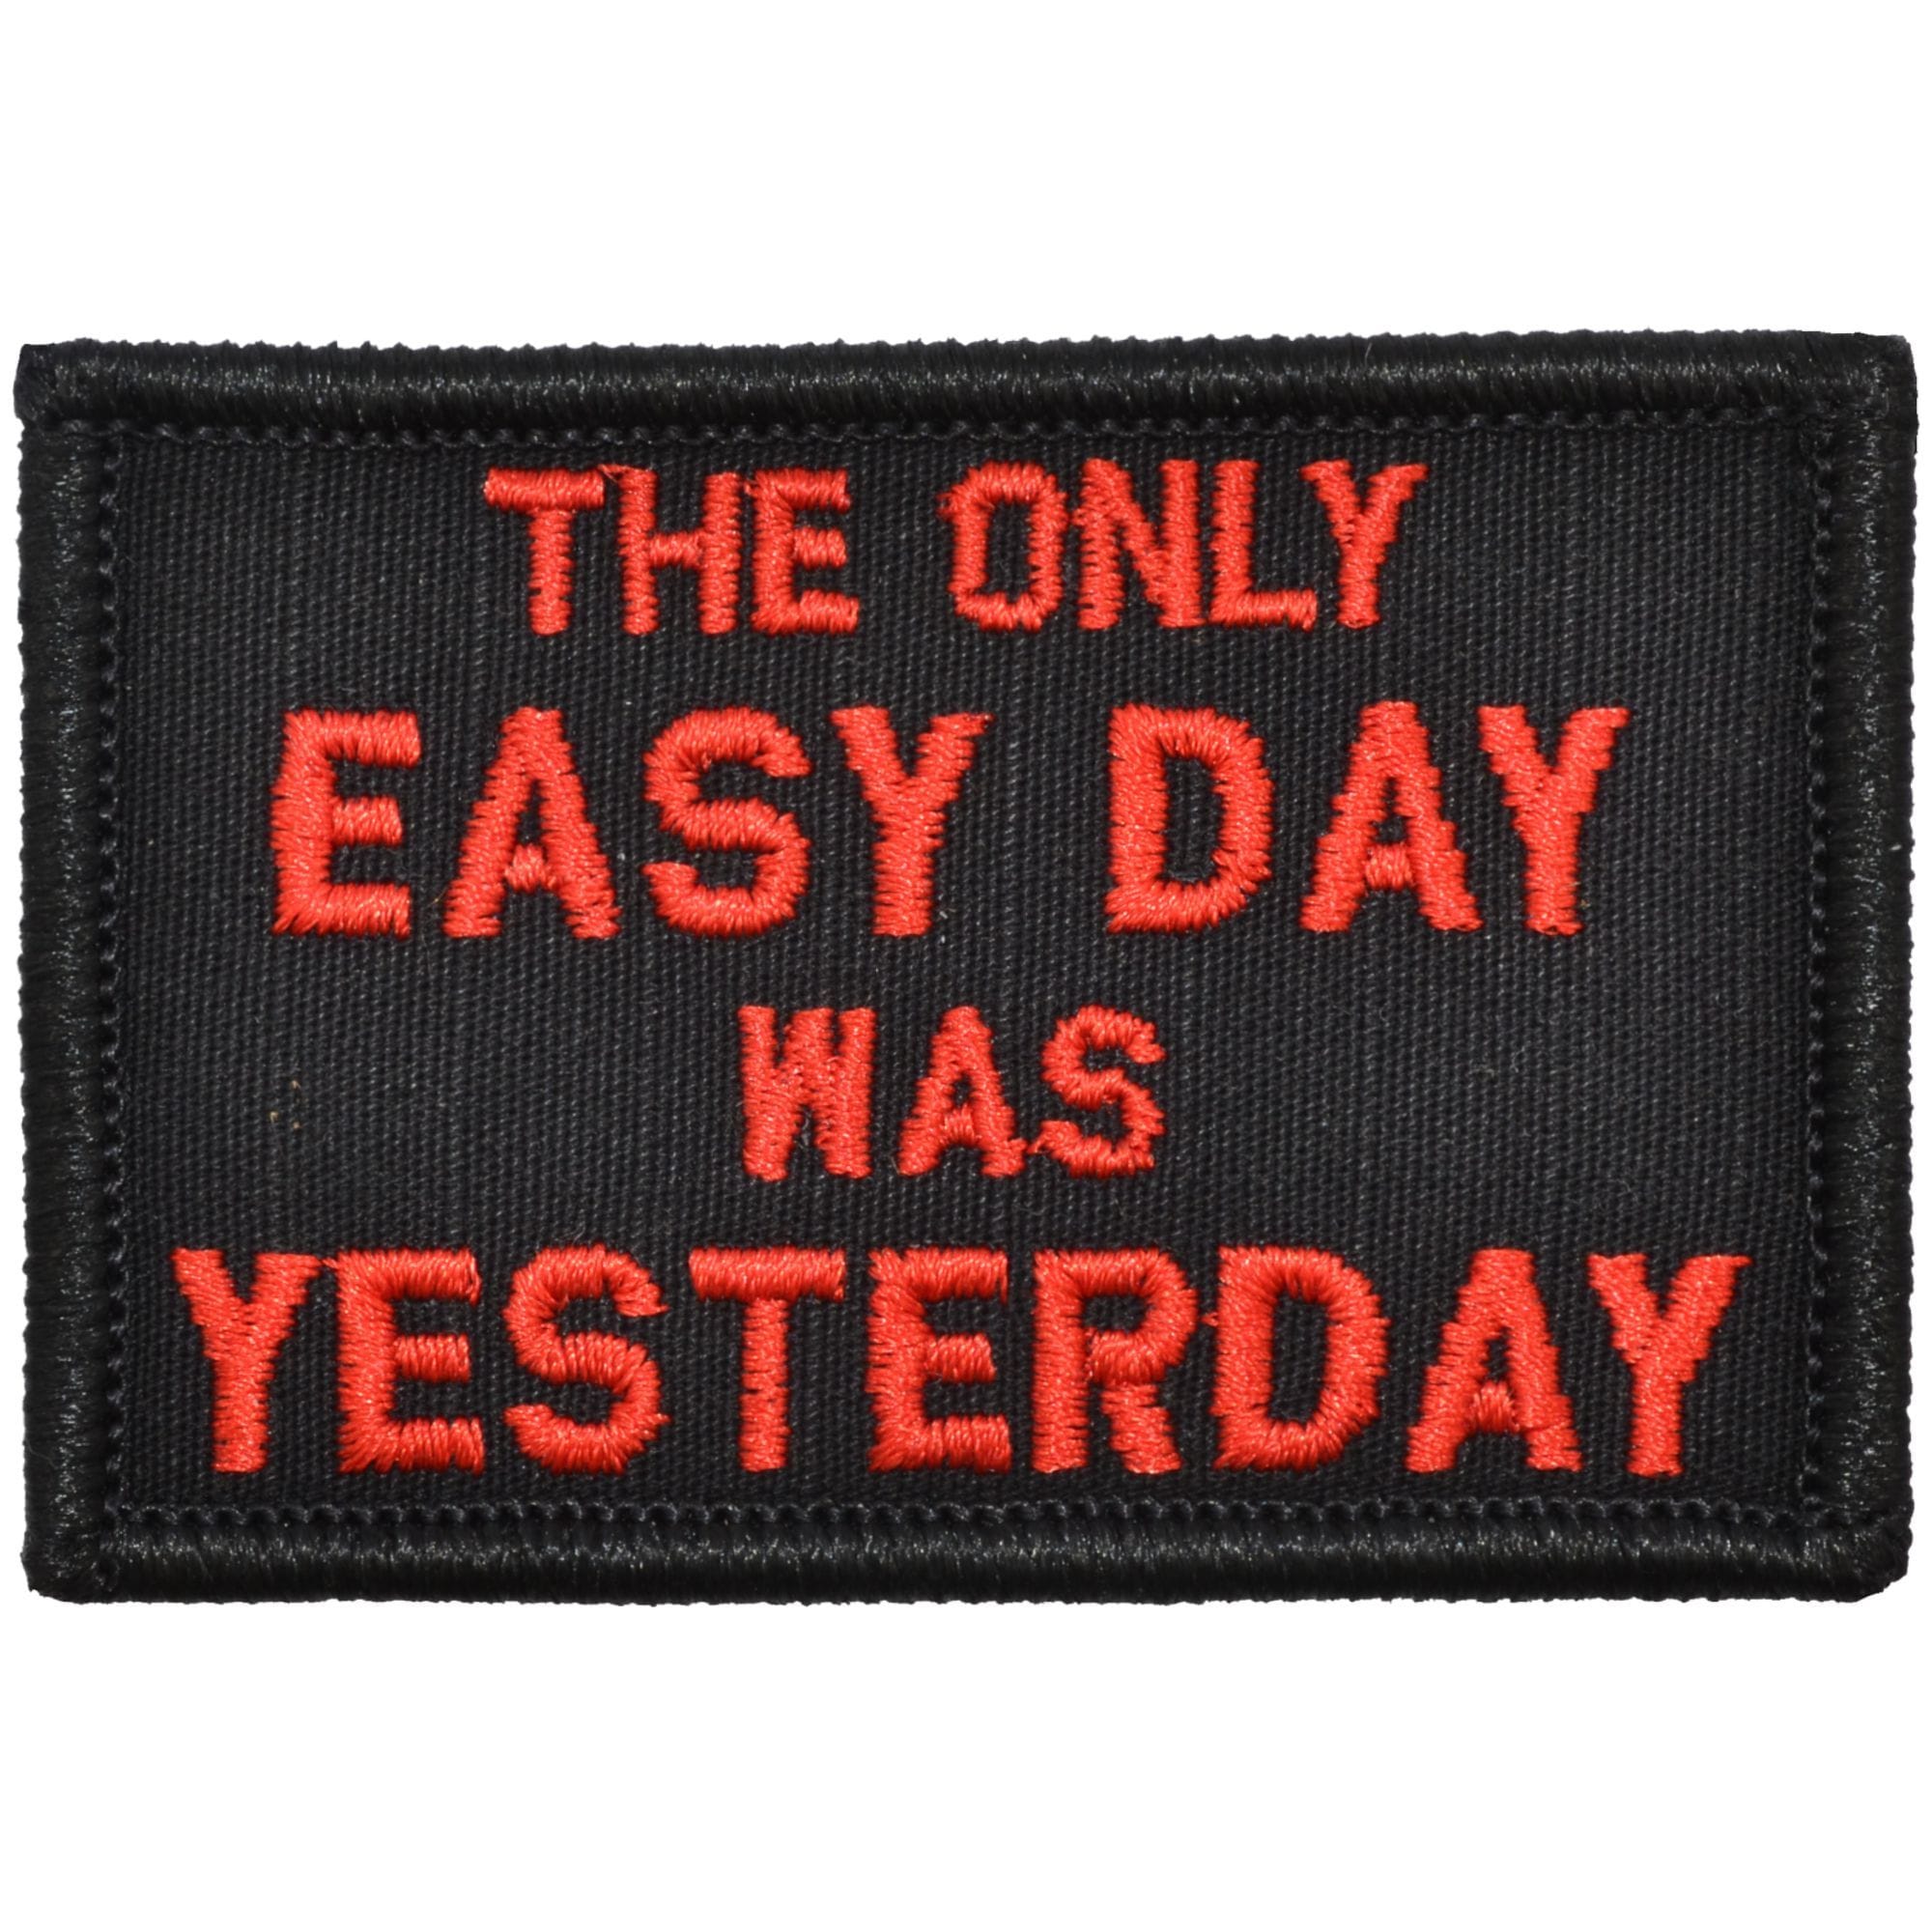 Tactical Gear Junkie Patches Black w/ Red The Only Easy Day Was Yesterday, Navy Seal Motto - 2x3 Patch